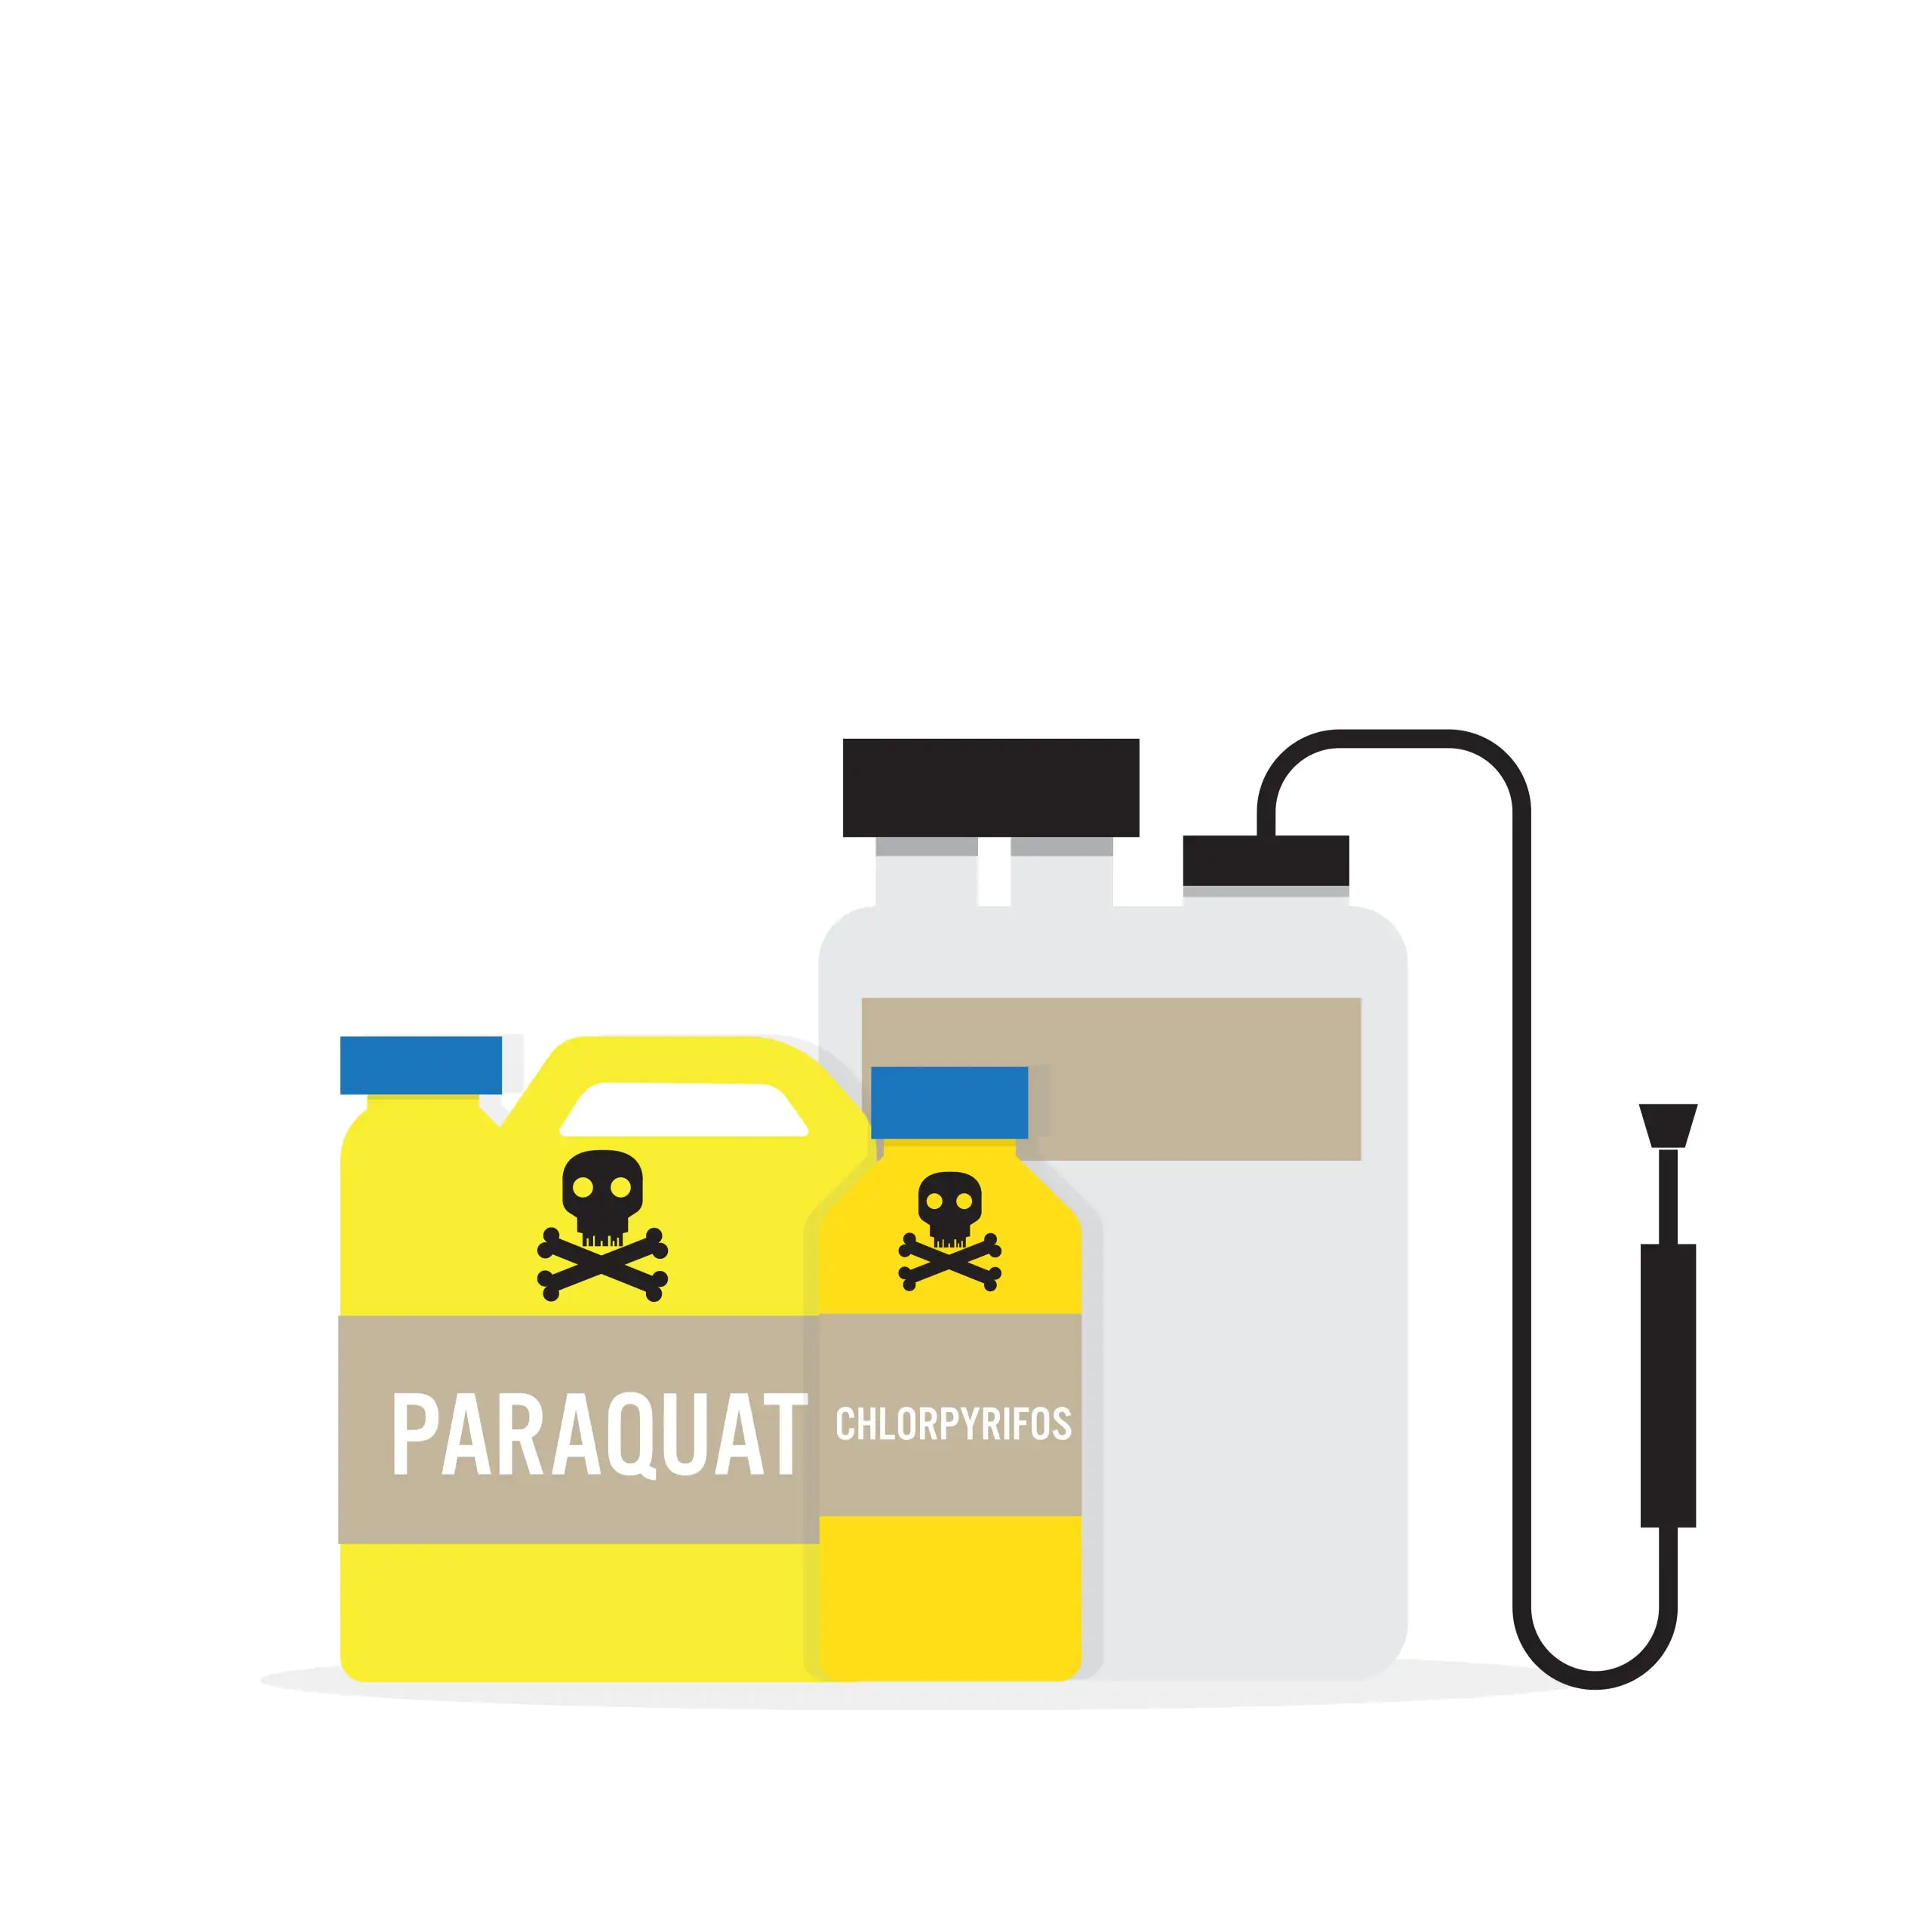 Paraquat Exposure Linked to Parkinson’s Disease | Lawsuits & What You Should Know